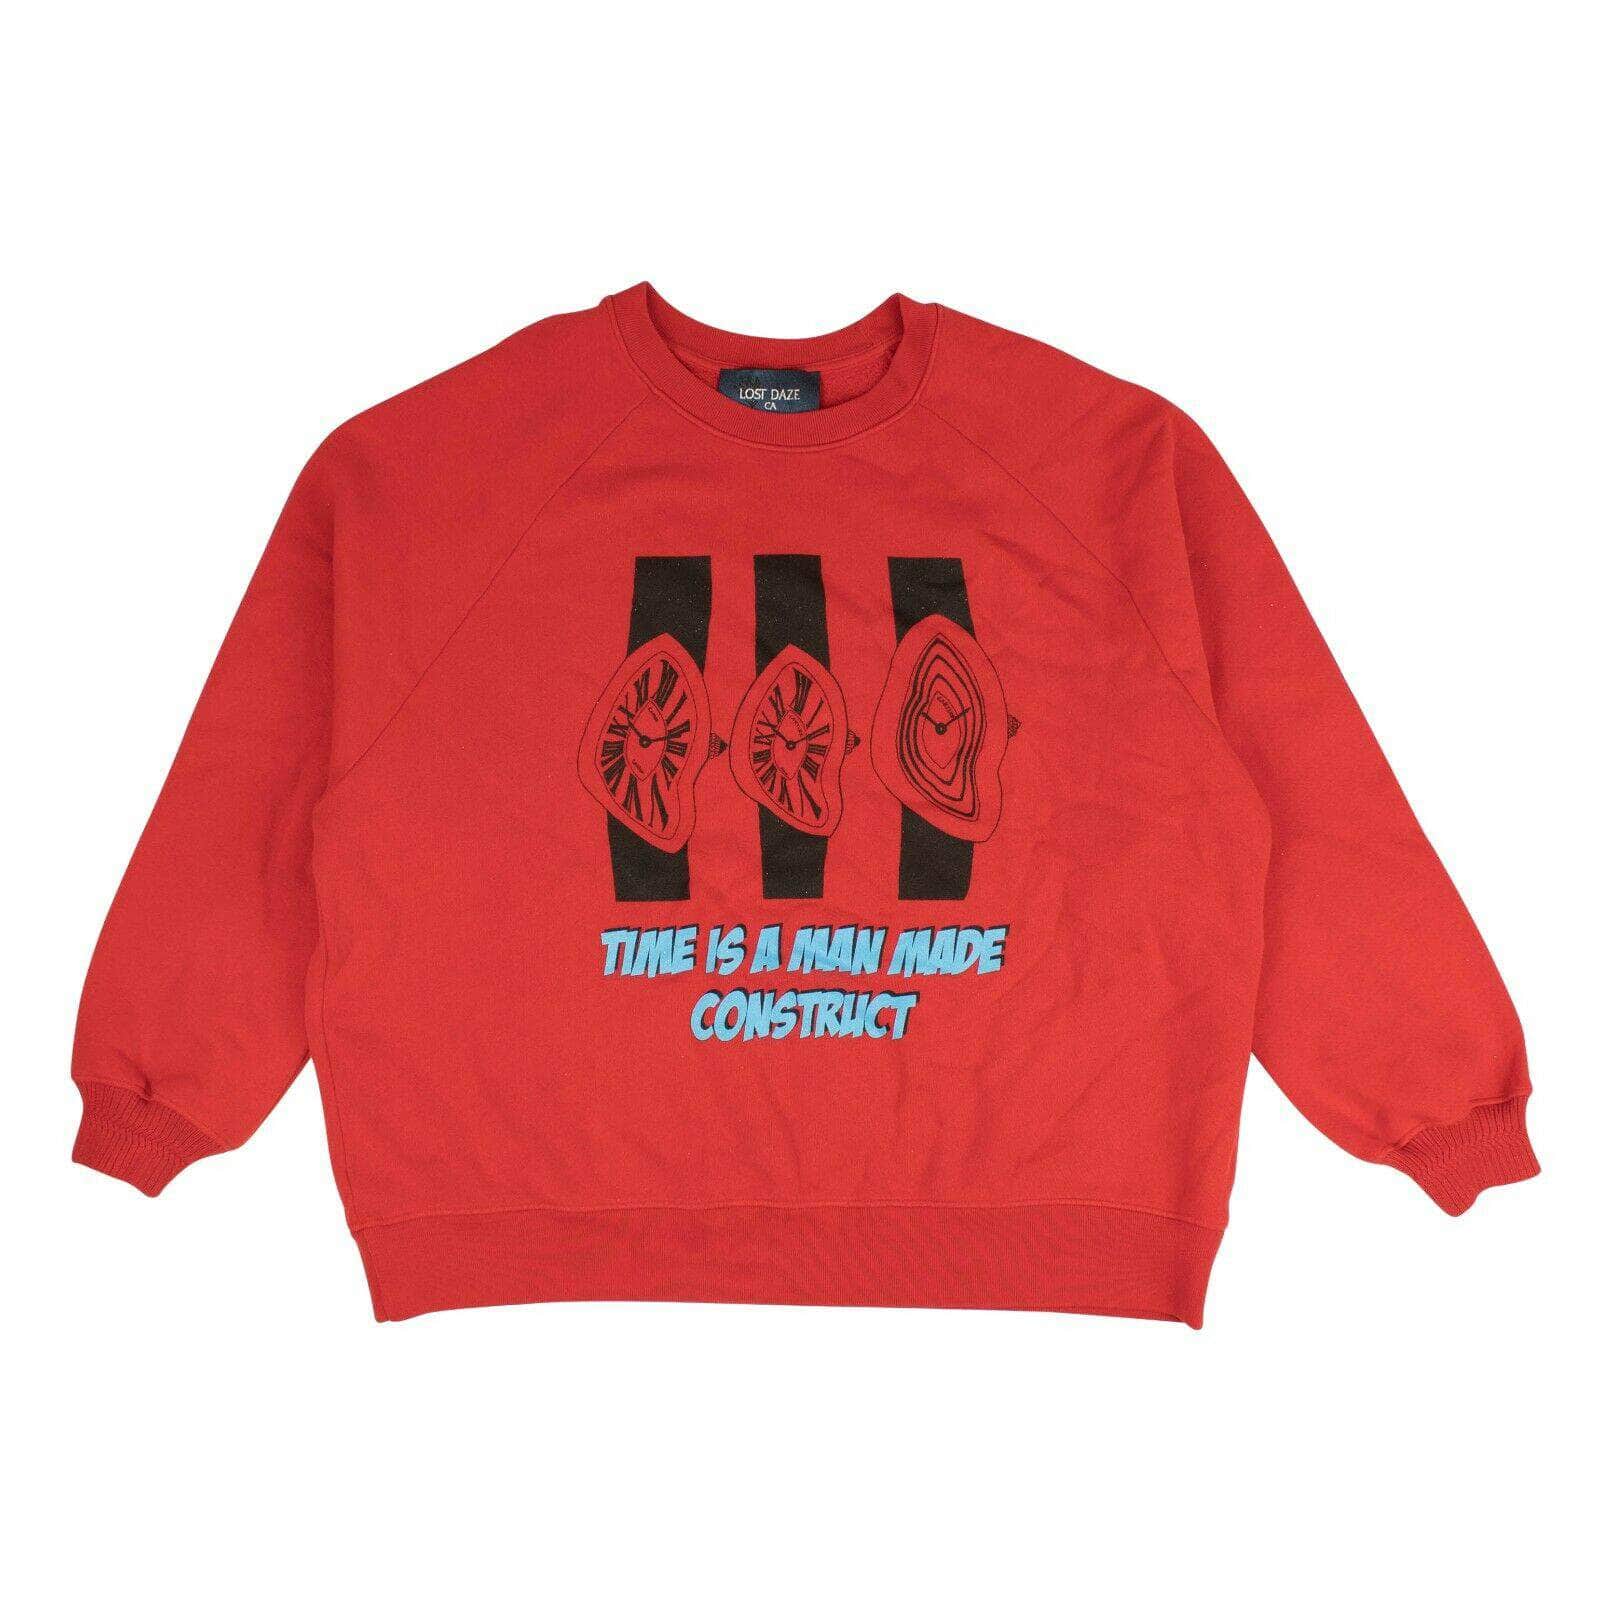 LOST DAZE channelenable-all, chicmi, couponcollection, gender-mens, lost-daze, main-clothing, mens-crewnecks, mens-shoes, size-l, size-xl, under-250 Red And Blue Time Crew Pullover Sweatshirt